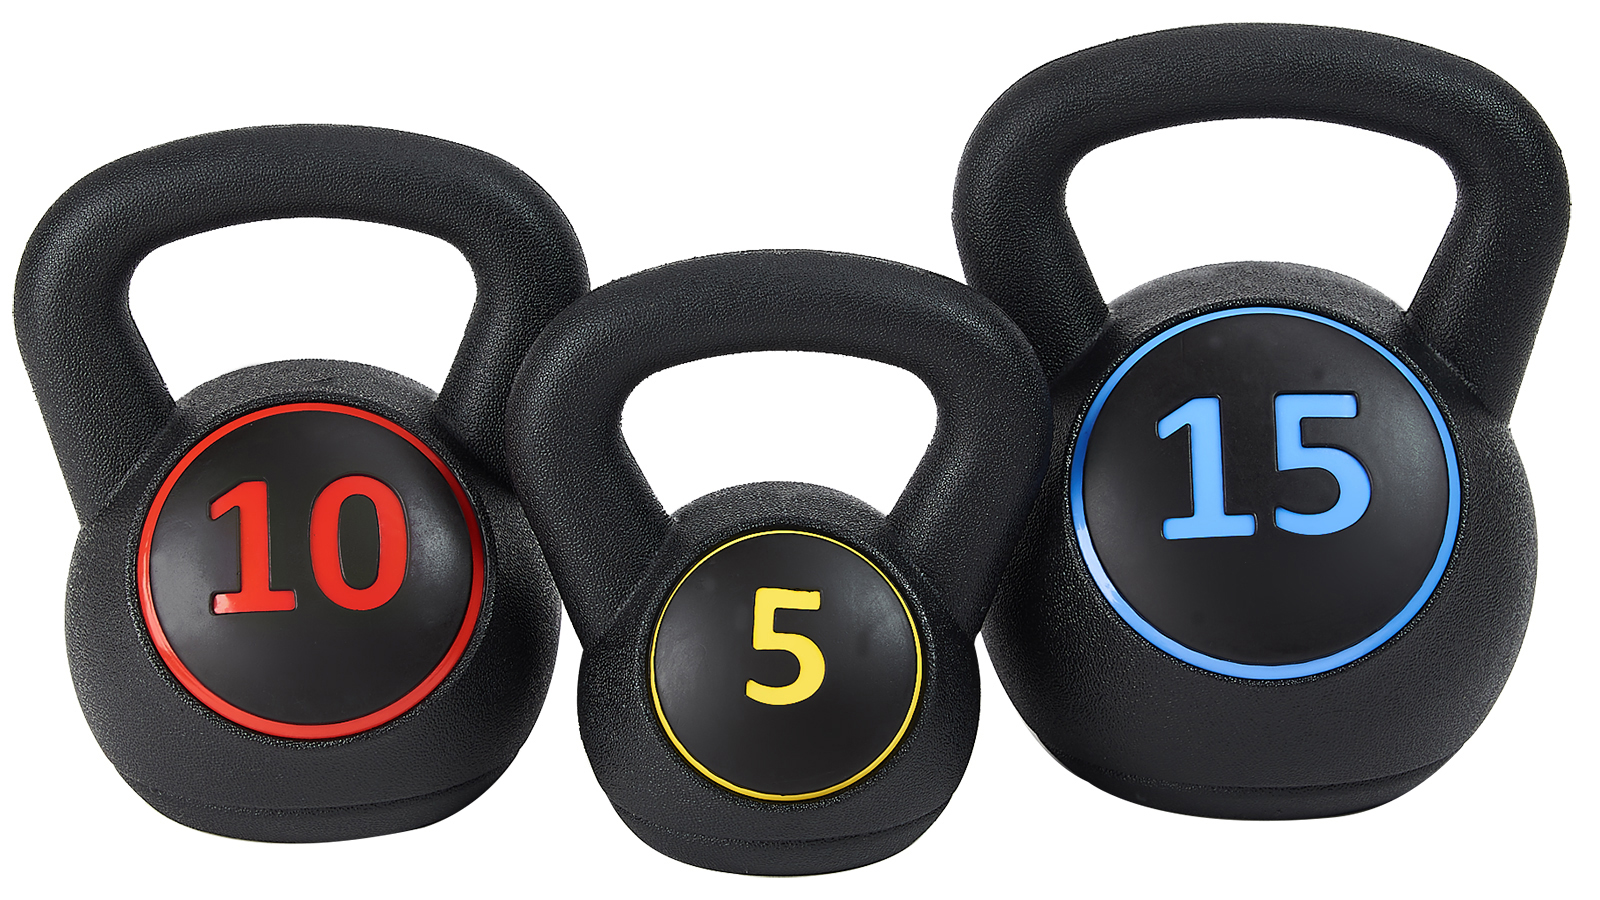 BalanceFrom Wide Grip Kettlebell Exercise Fitness Weight Set, 3-Pieces: 5lb, 10lb, and 15lb Kettlebells - image 1 of 6